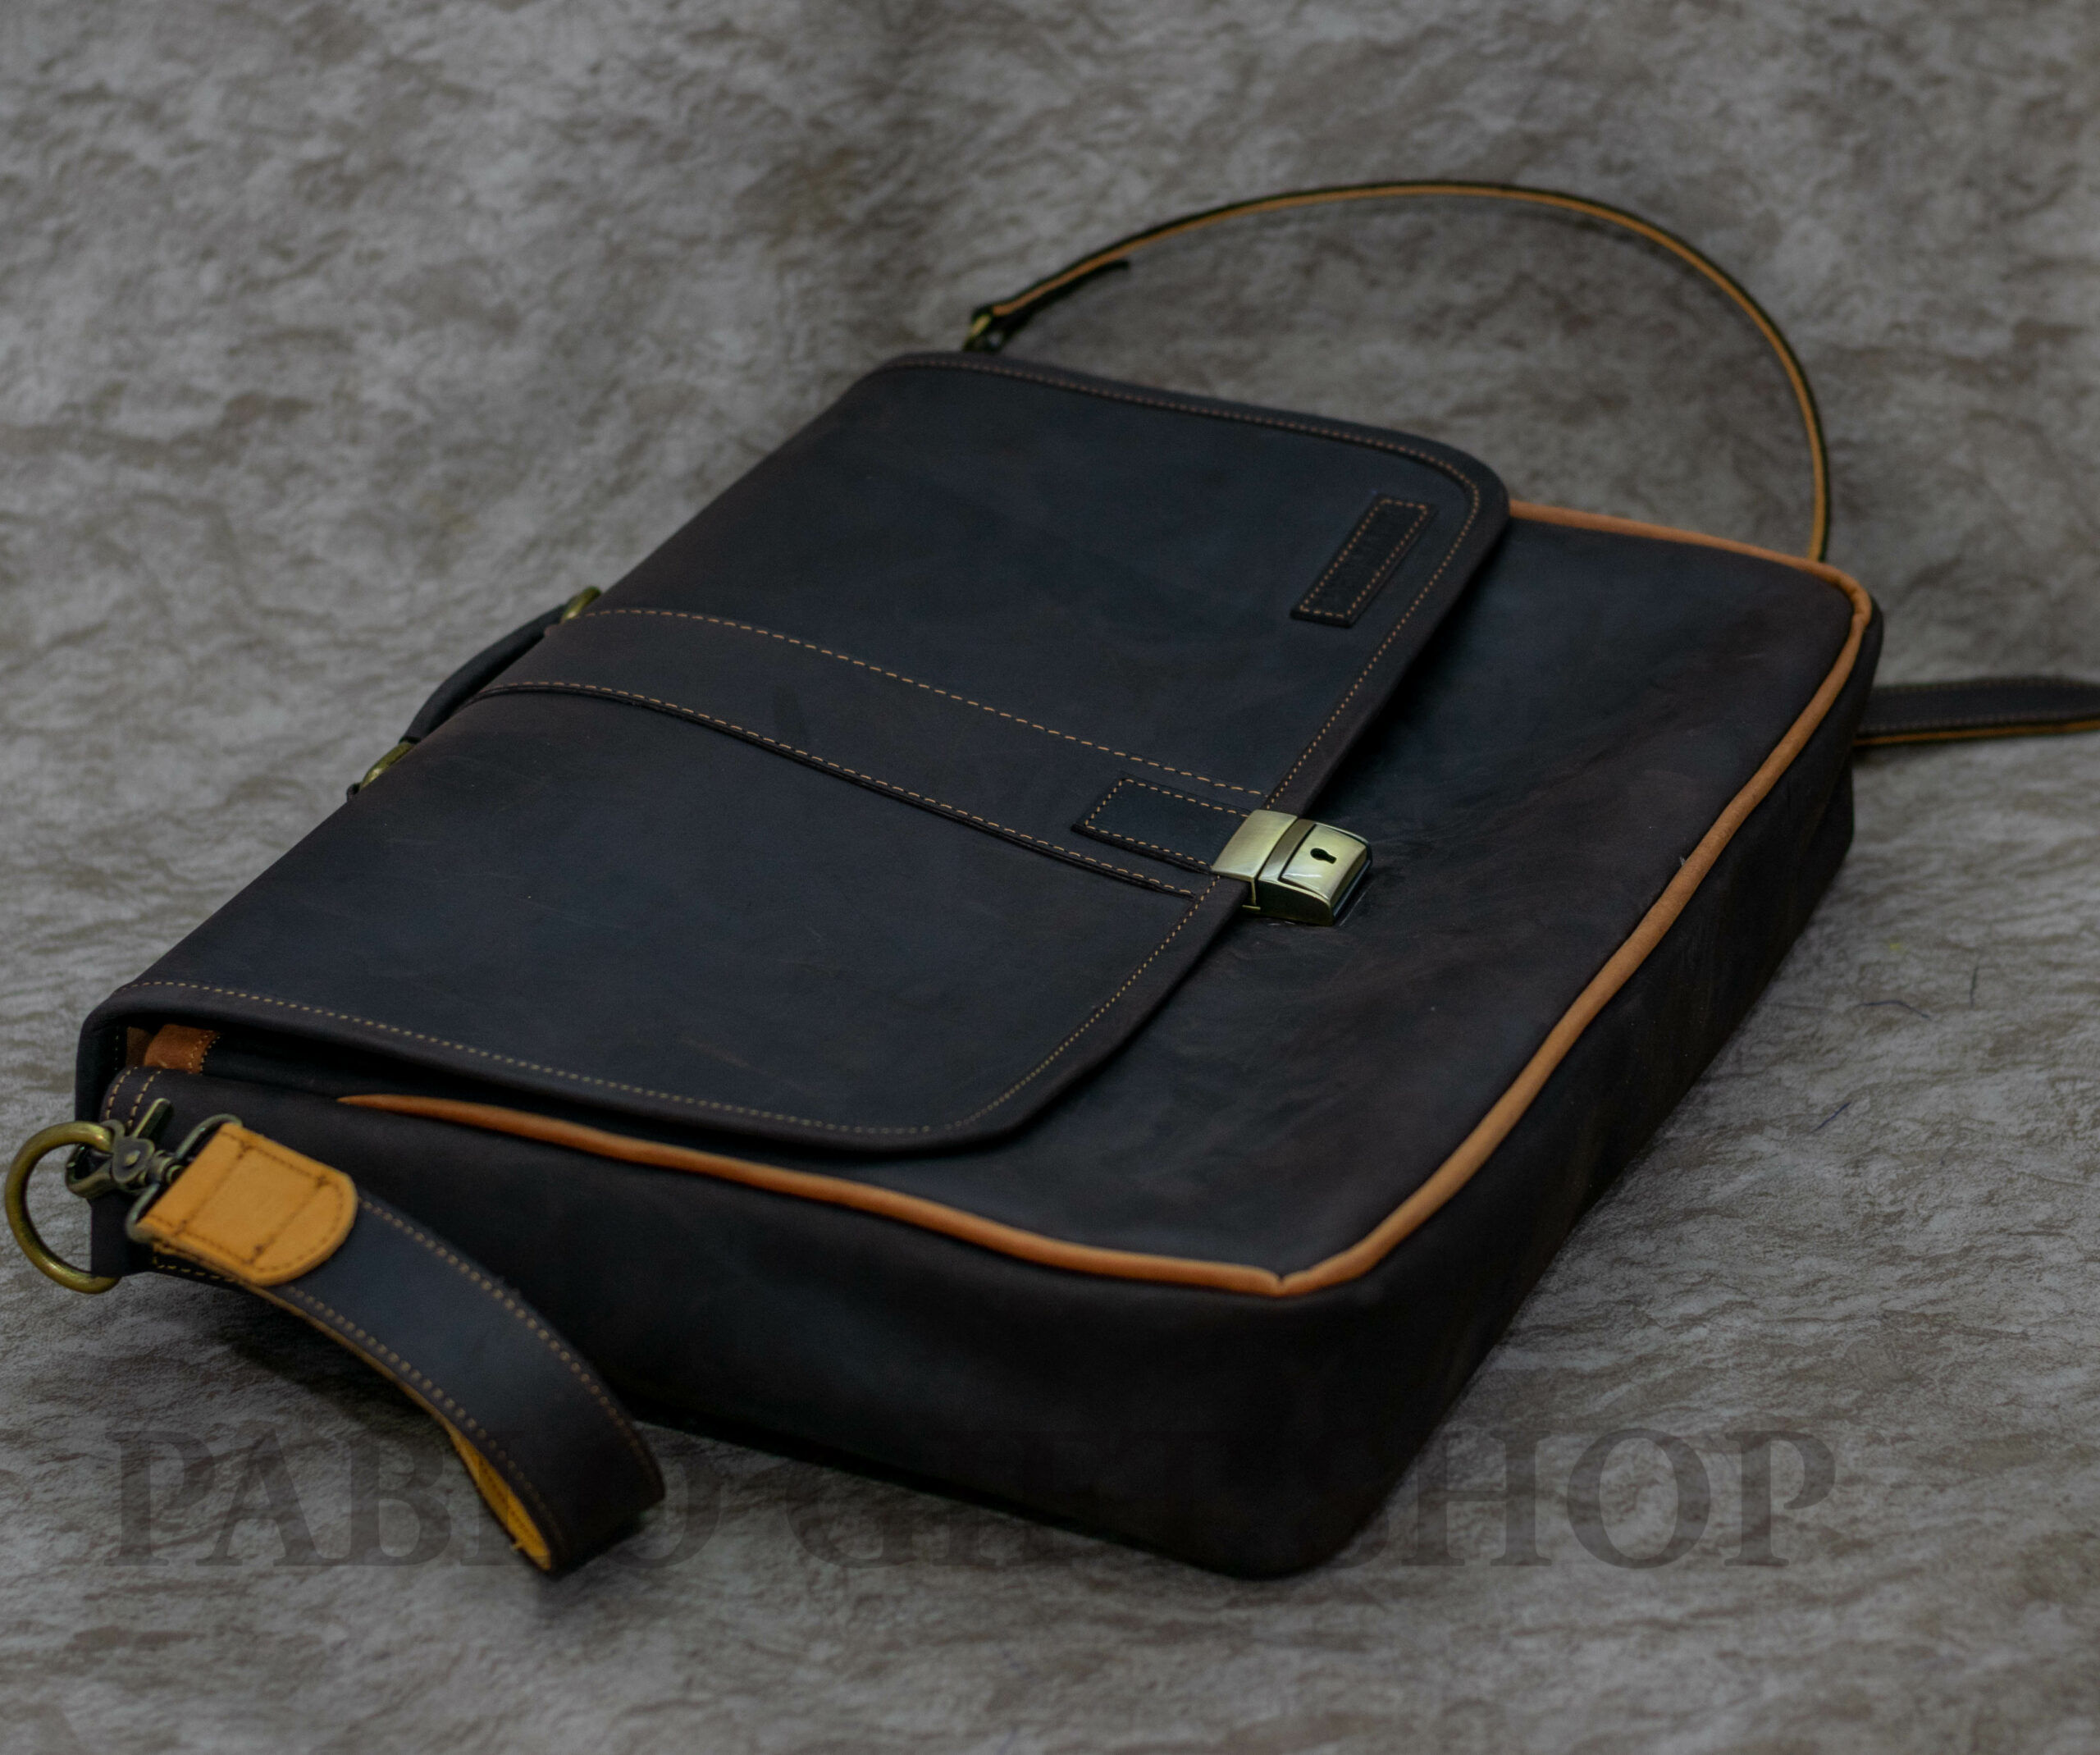 Pure Leather Laptop Bag